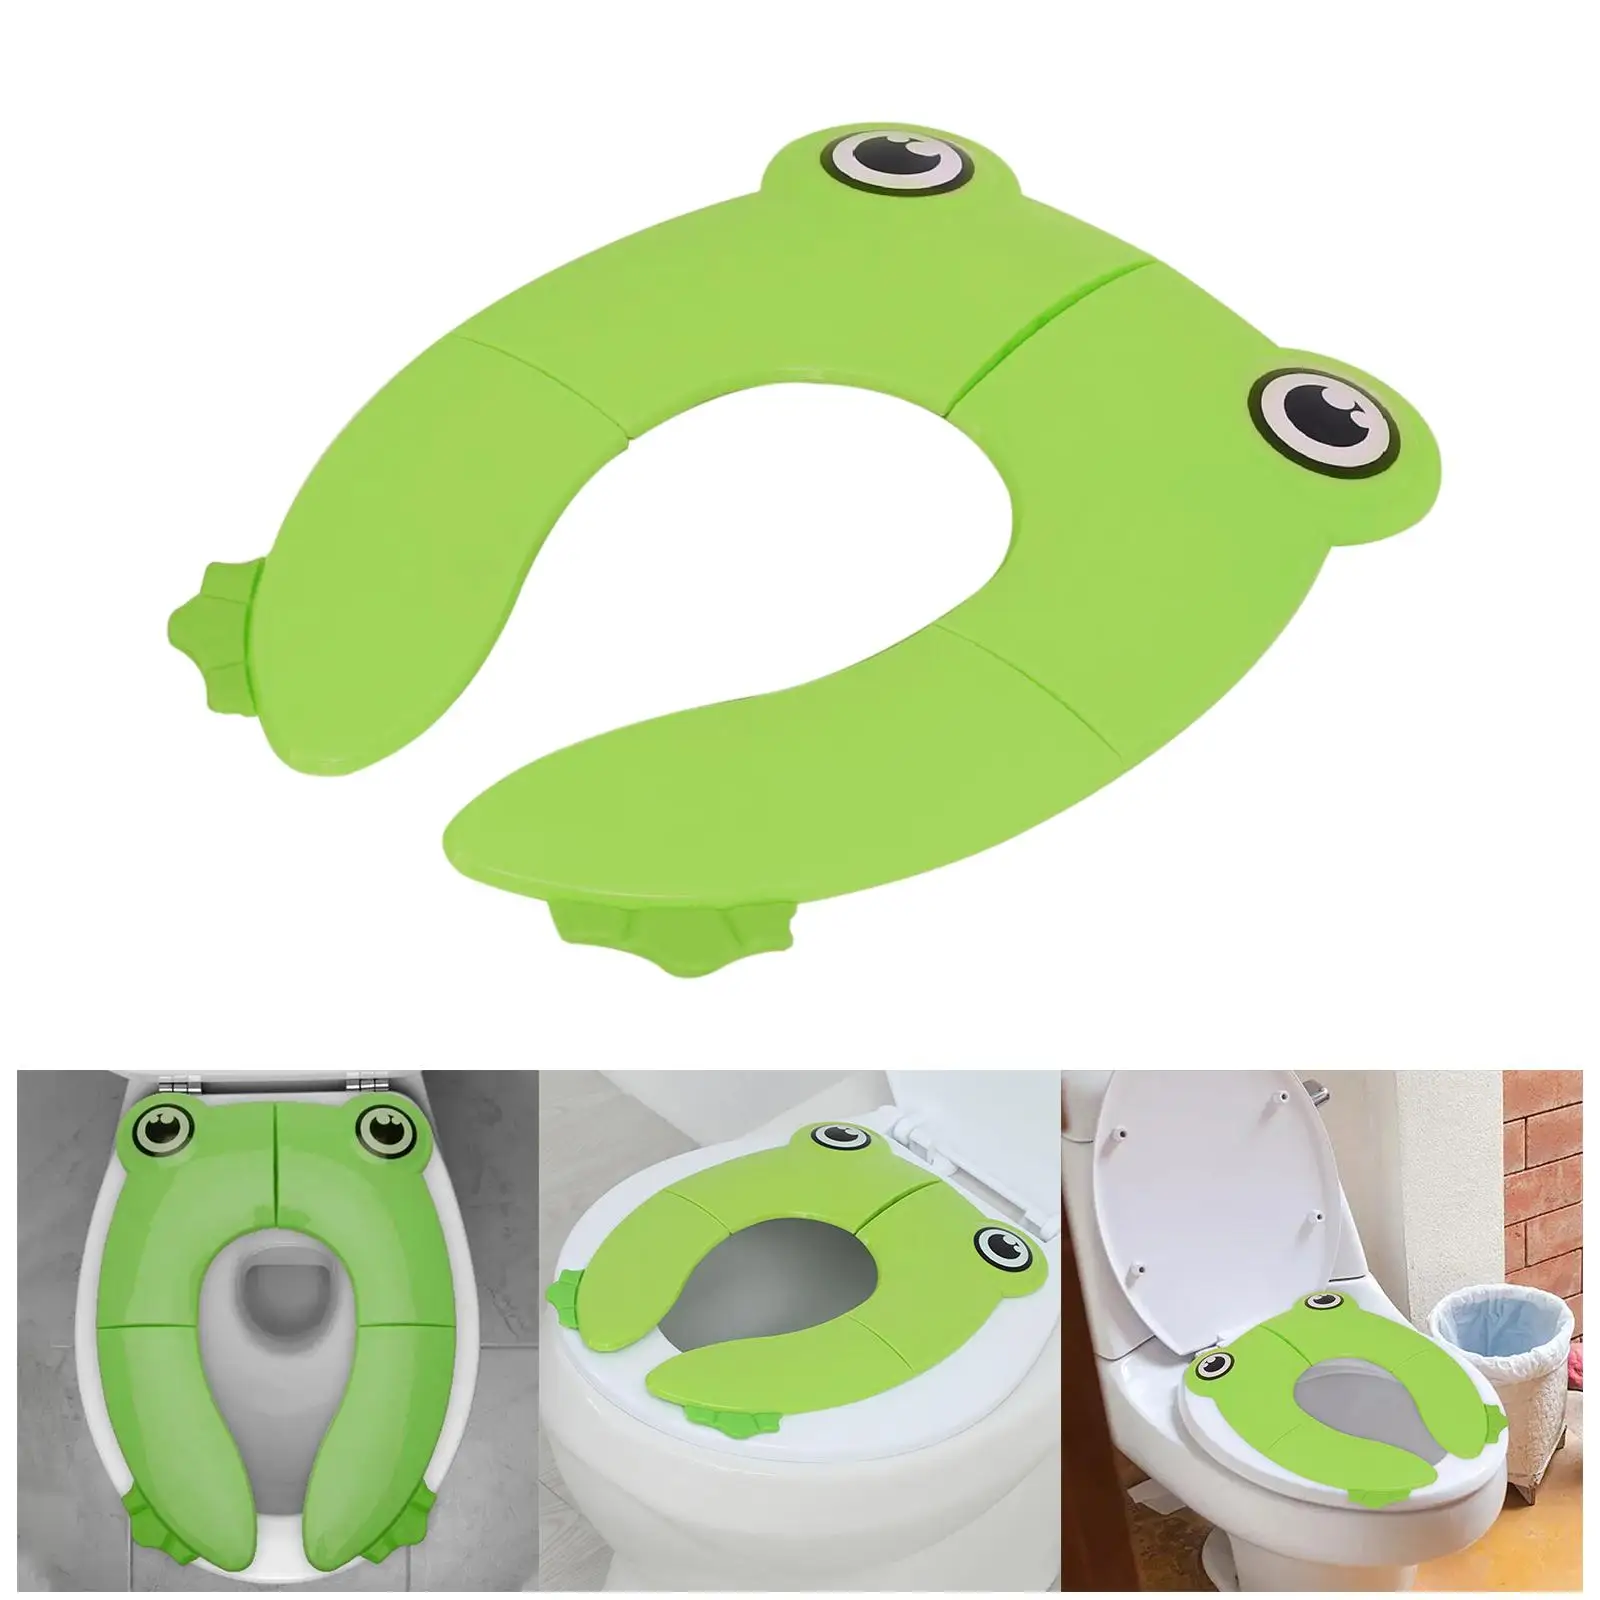 Foldable Toilet Seat Cushion with Storage Bag Portable for Camping Toddler